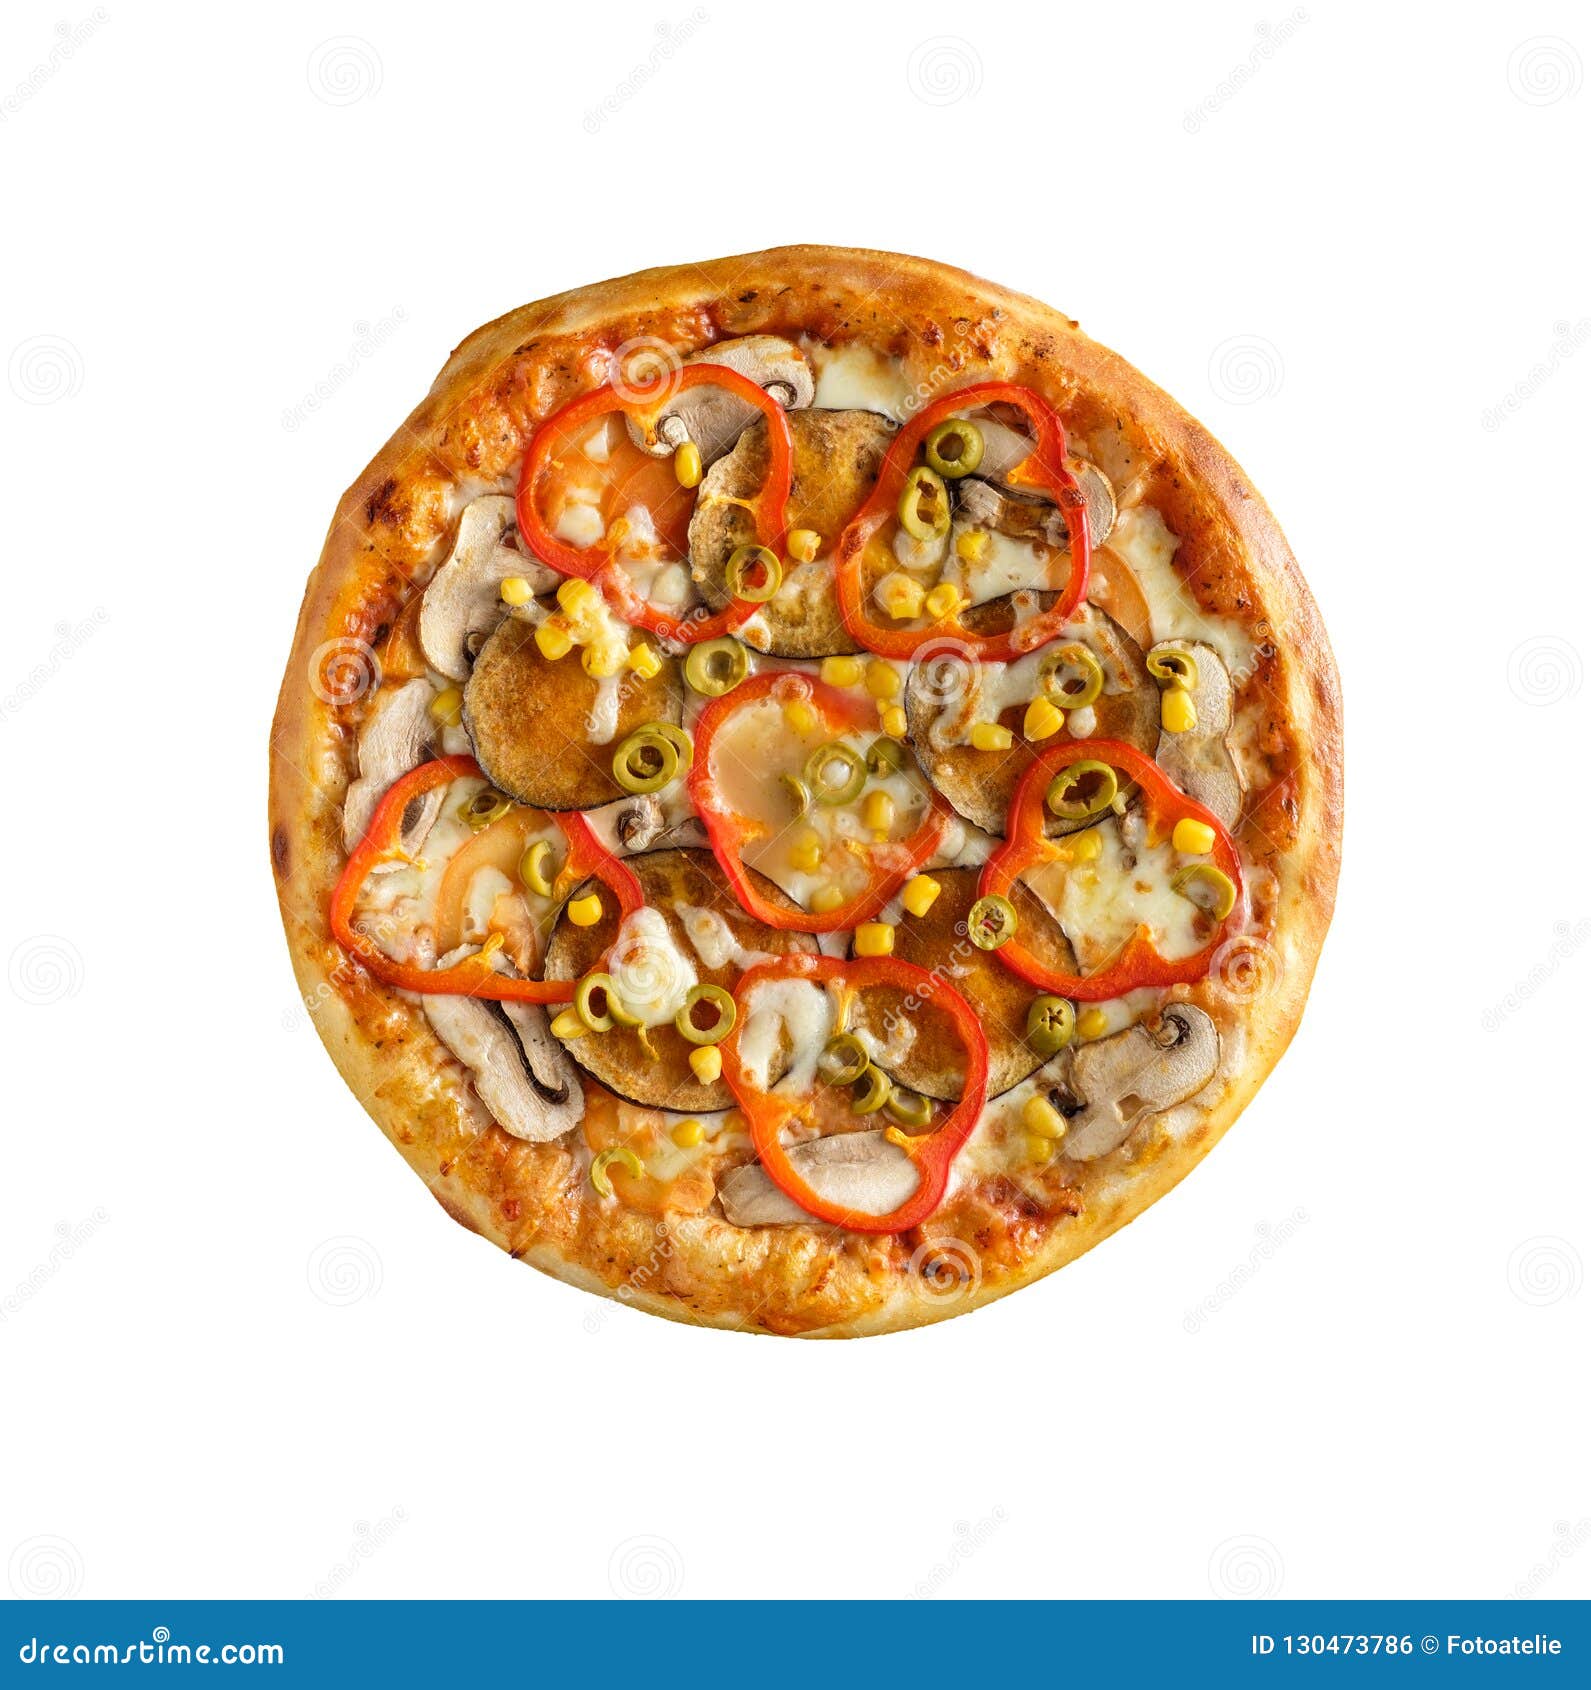 tasty, homemade, flavorful pizza  on white background, t